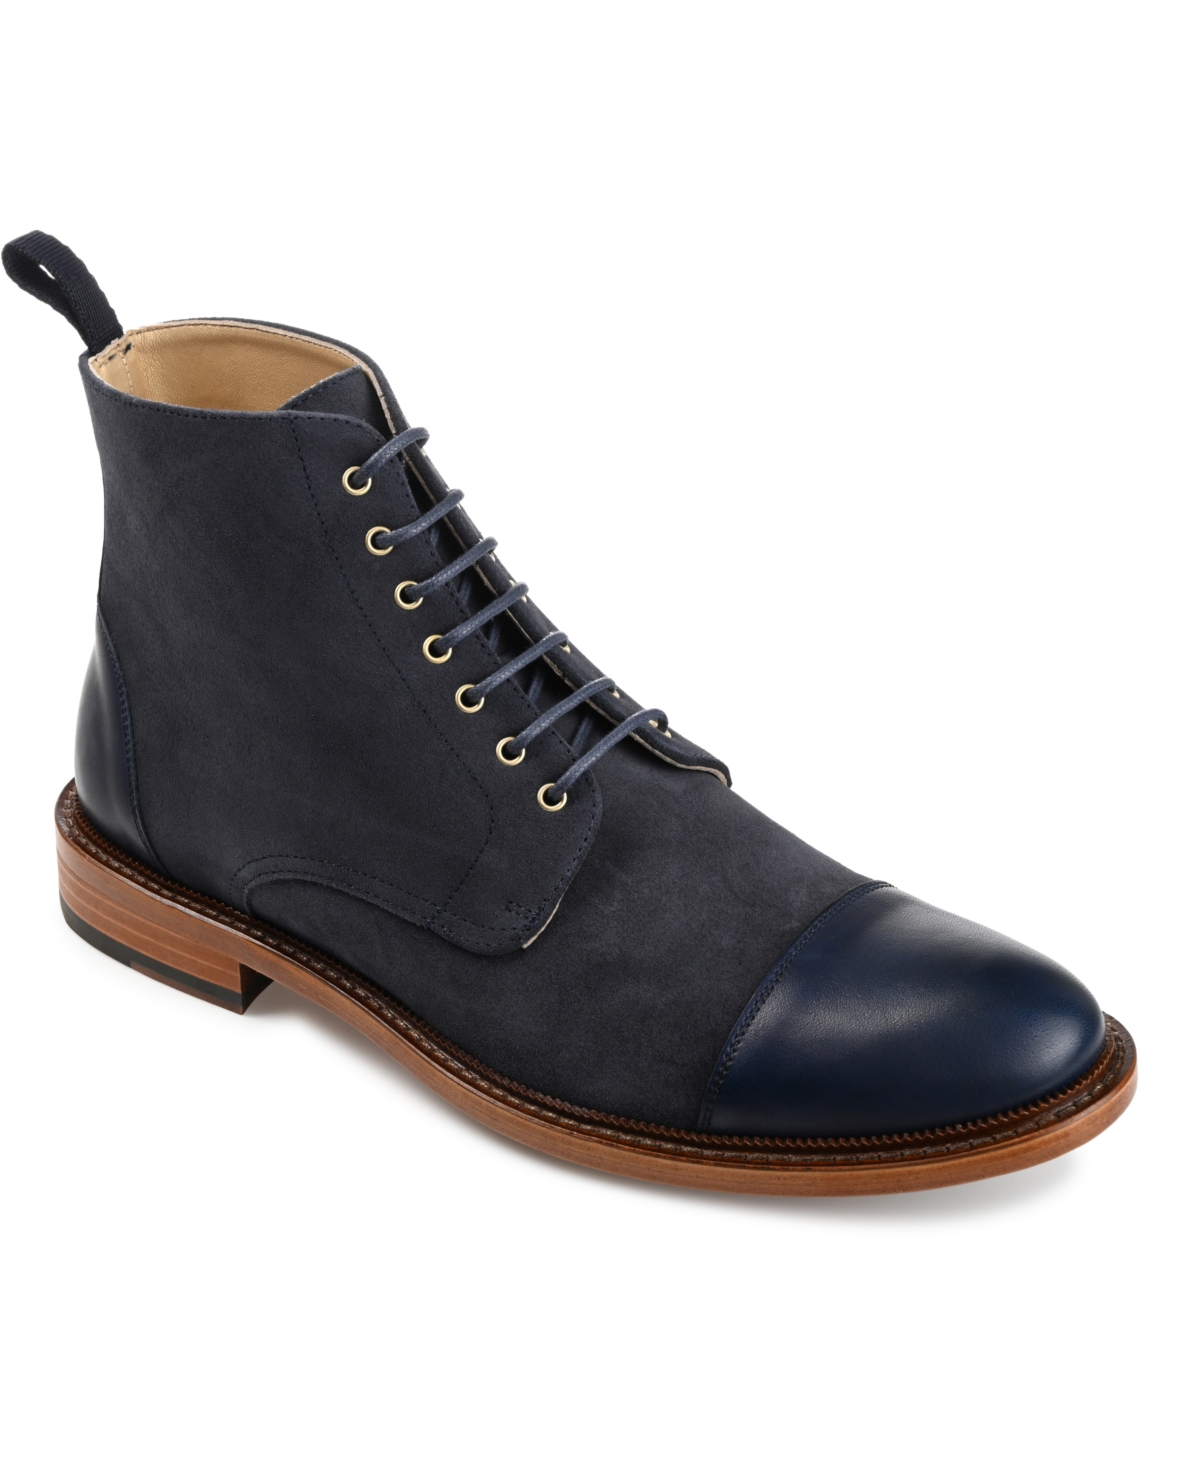 Men's Troy Handcrafted Leather and Suede Dress Boots - Black